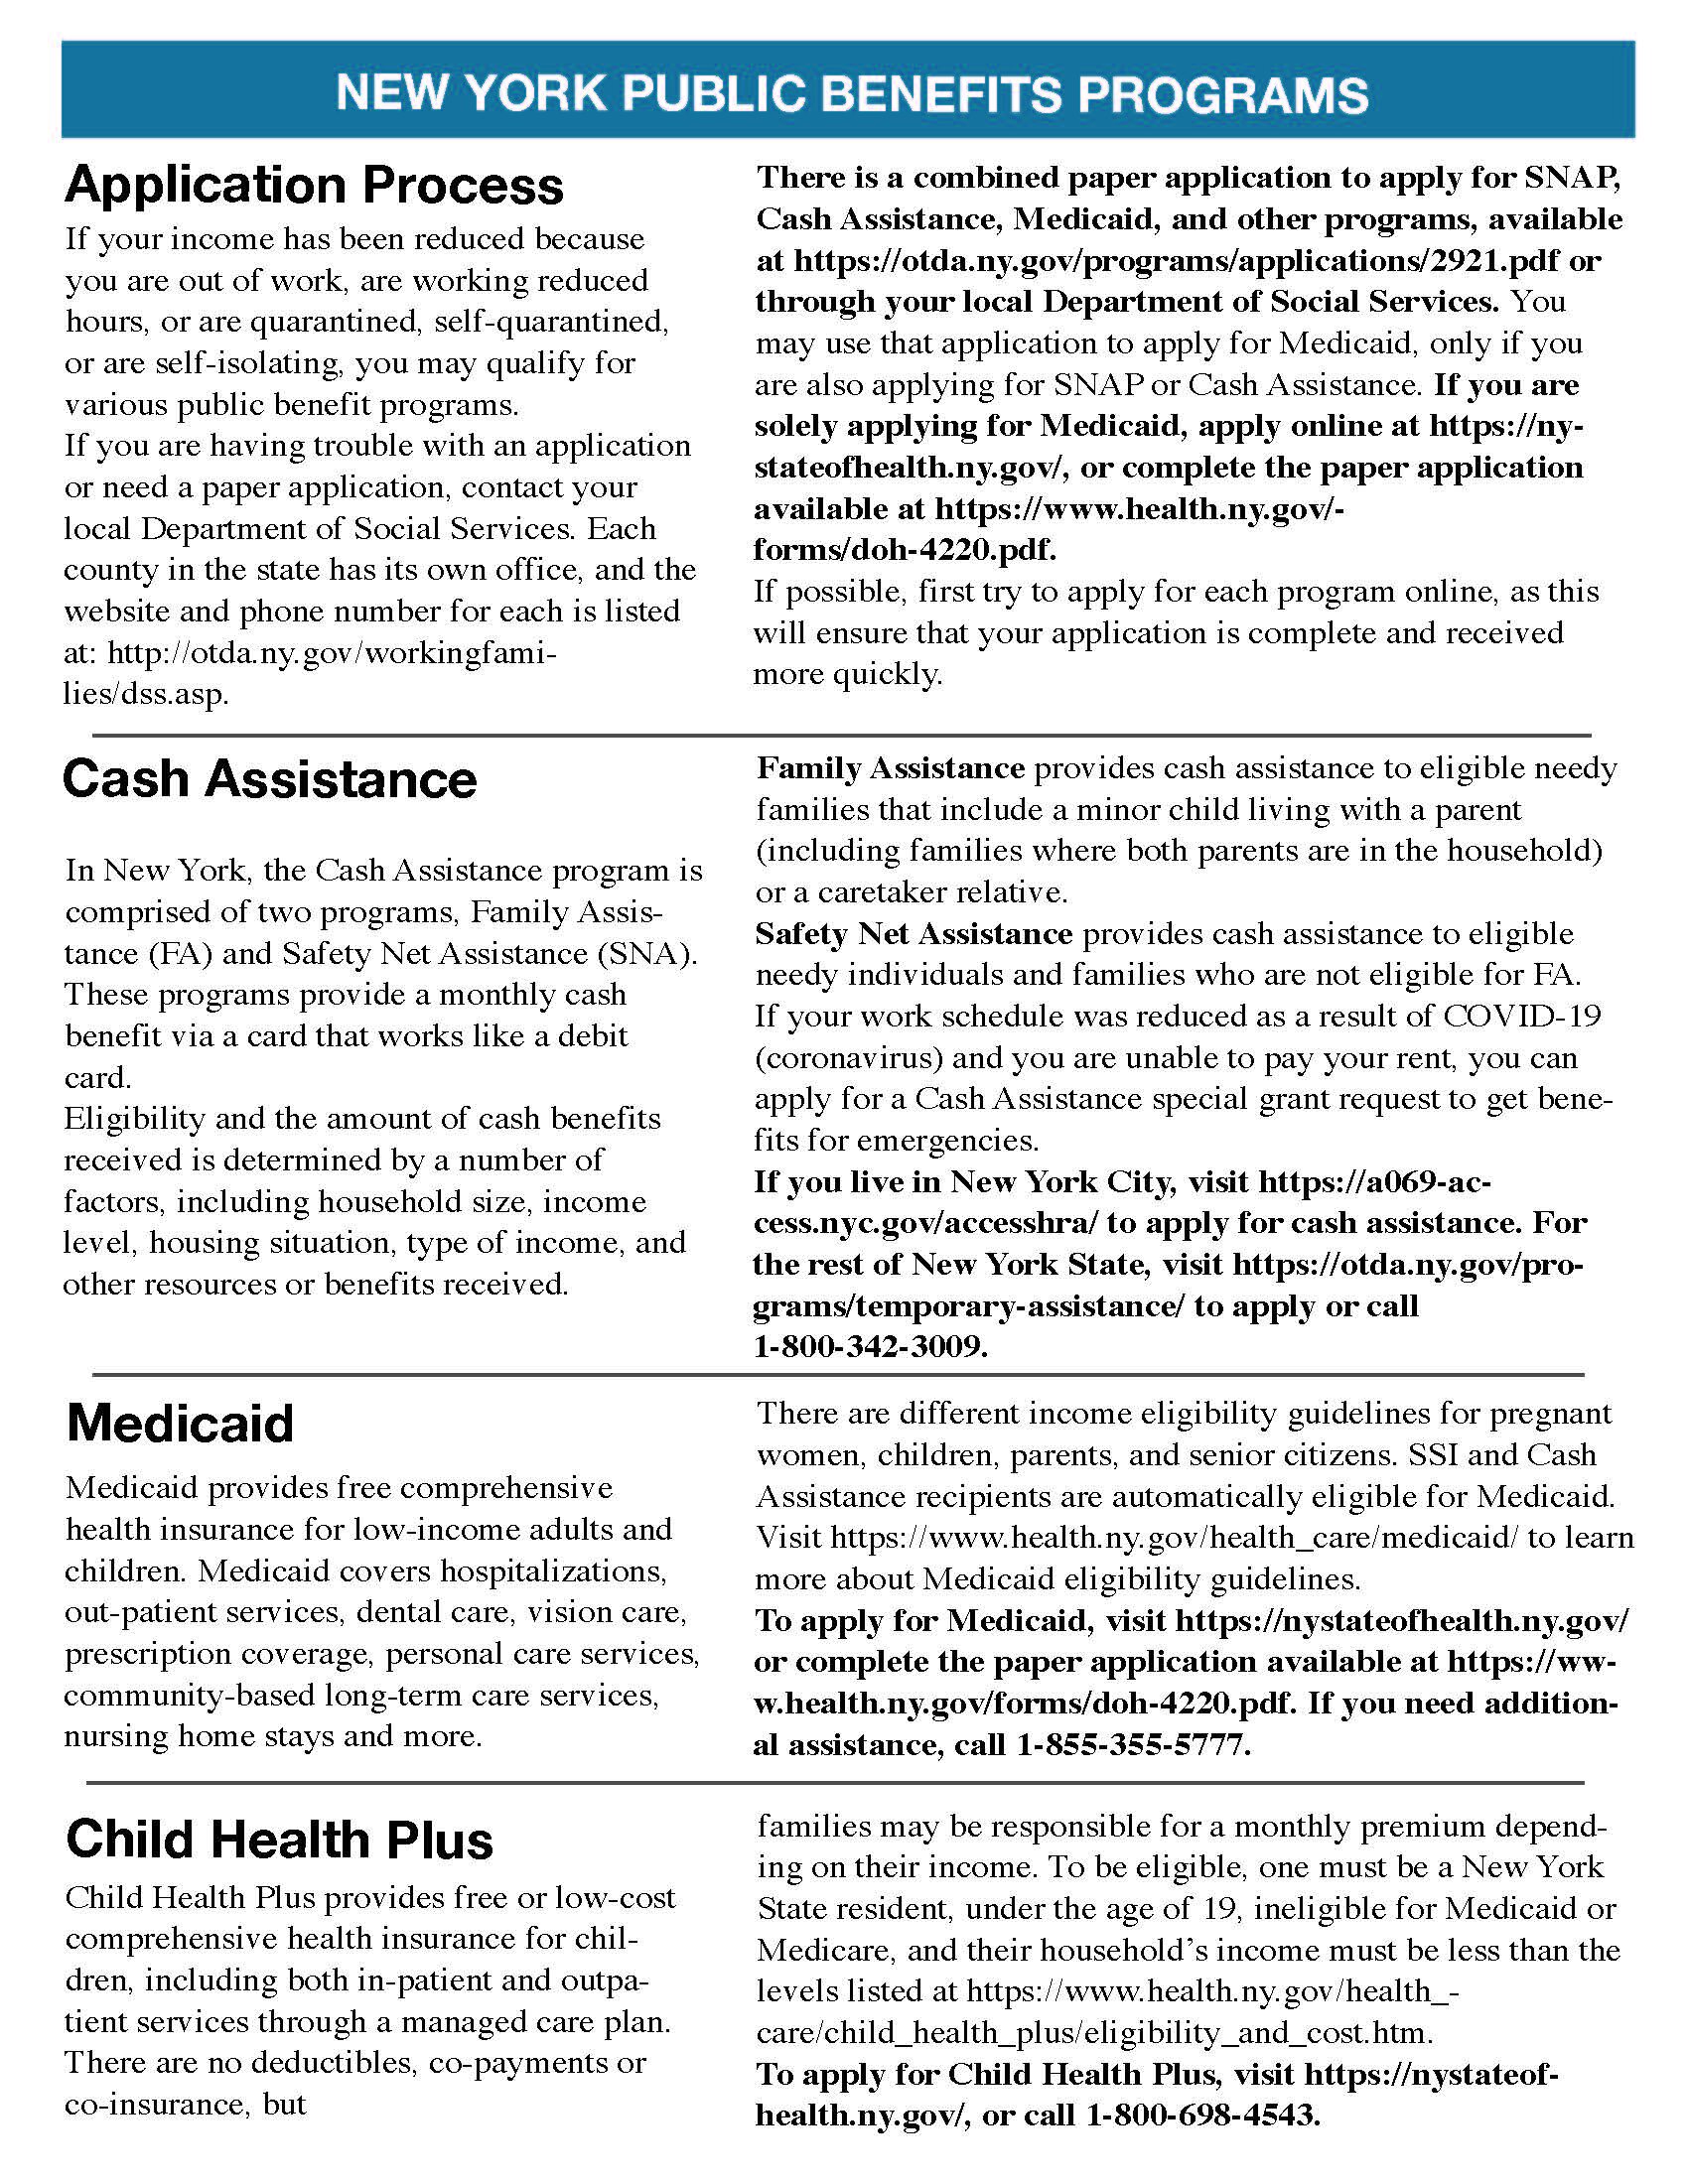 LWWTF Worker Protections+Benefits 3.27.2020_Page_3.jpg